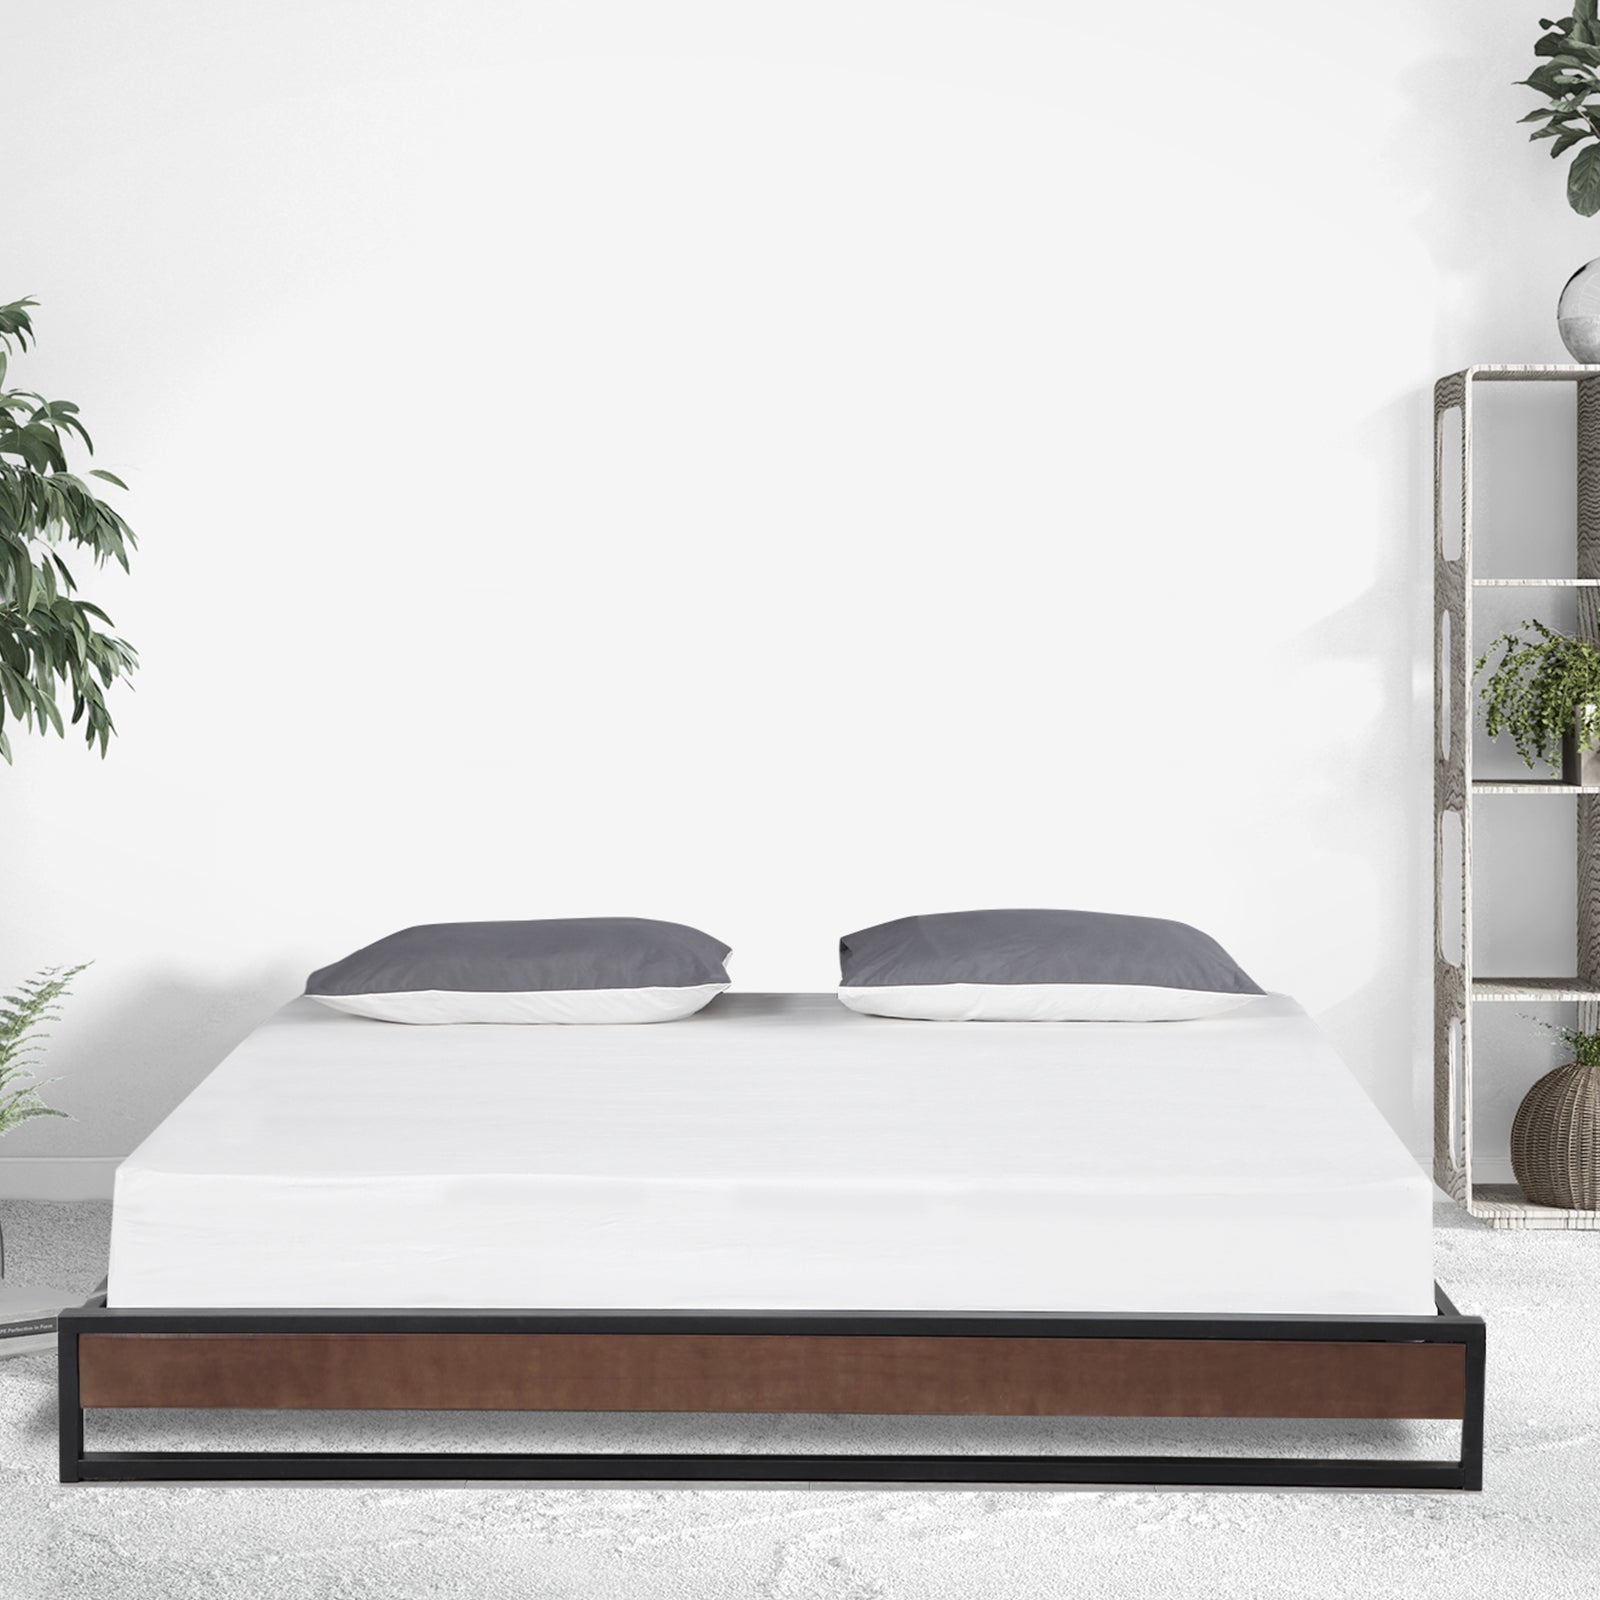 Sorrento Metal and Wood bed base - Queen